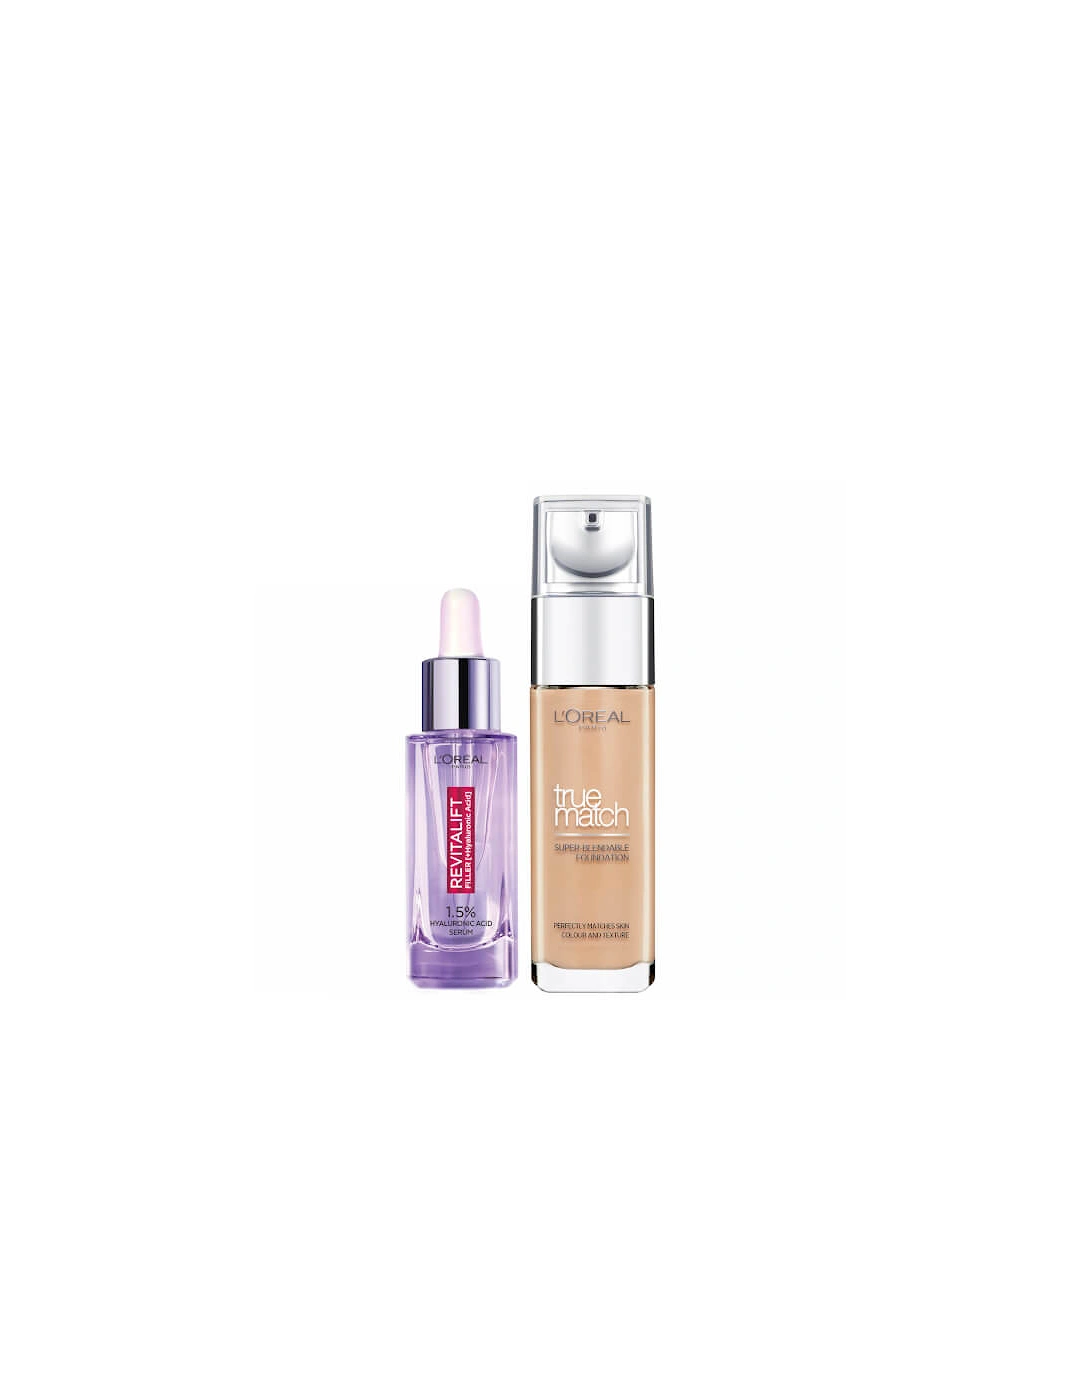 L’Oreal Paris Hyaluronic Acid Filler Serum and True Match Hyaluronic Acid Foundation Duo - 6.5W Golden Toffee, 2 of 1